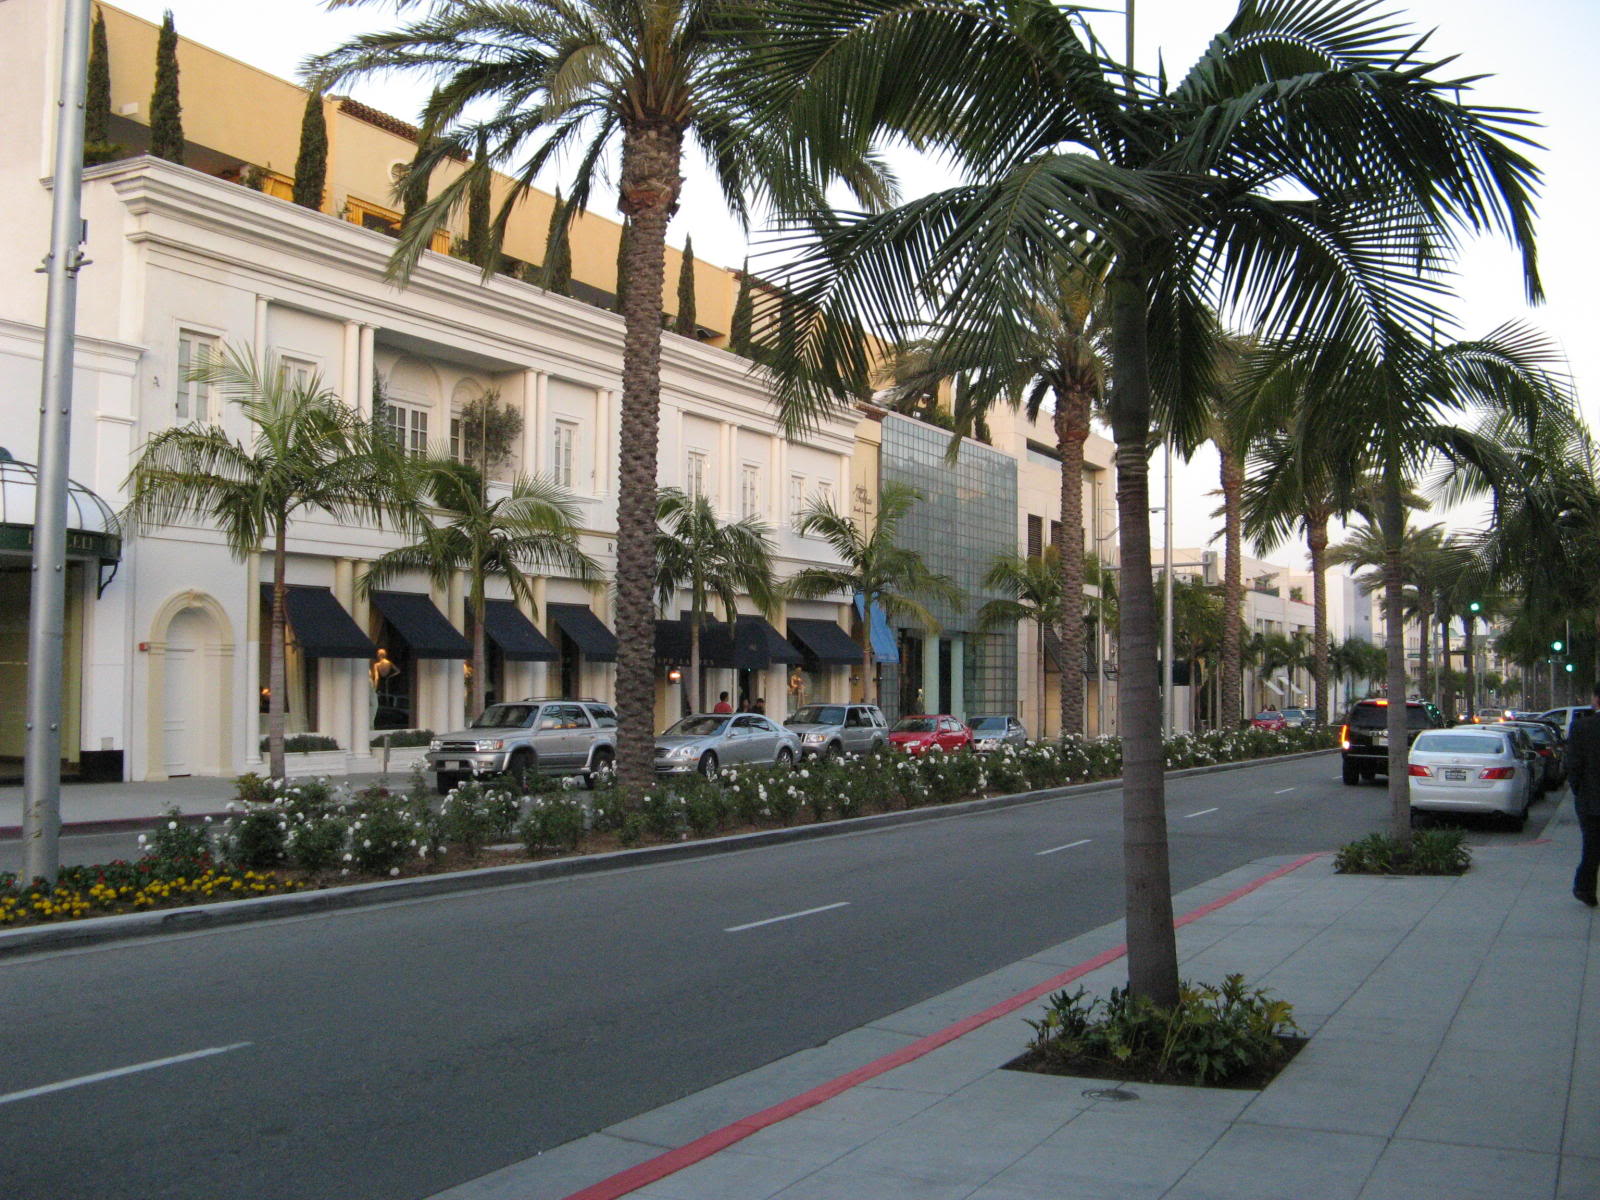 Rodeo Drive 072 Graphics Code Rodeo Drive 072 Comments Pictures